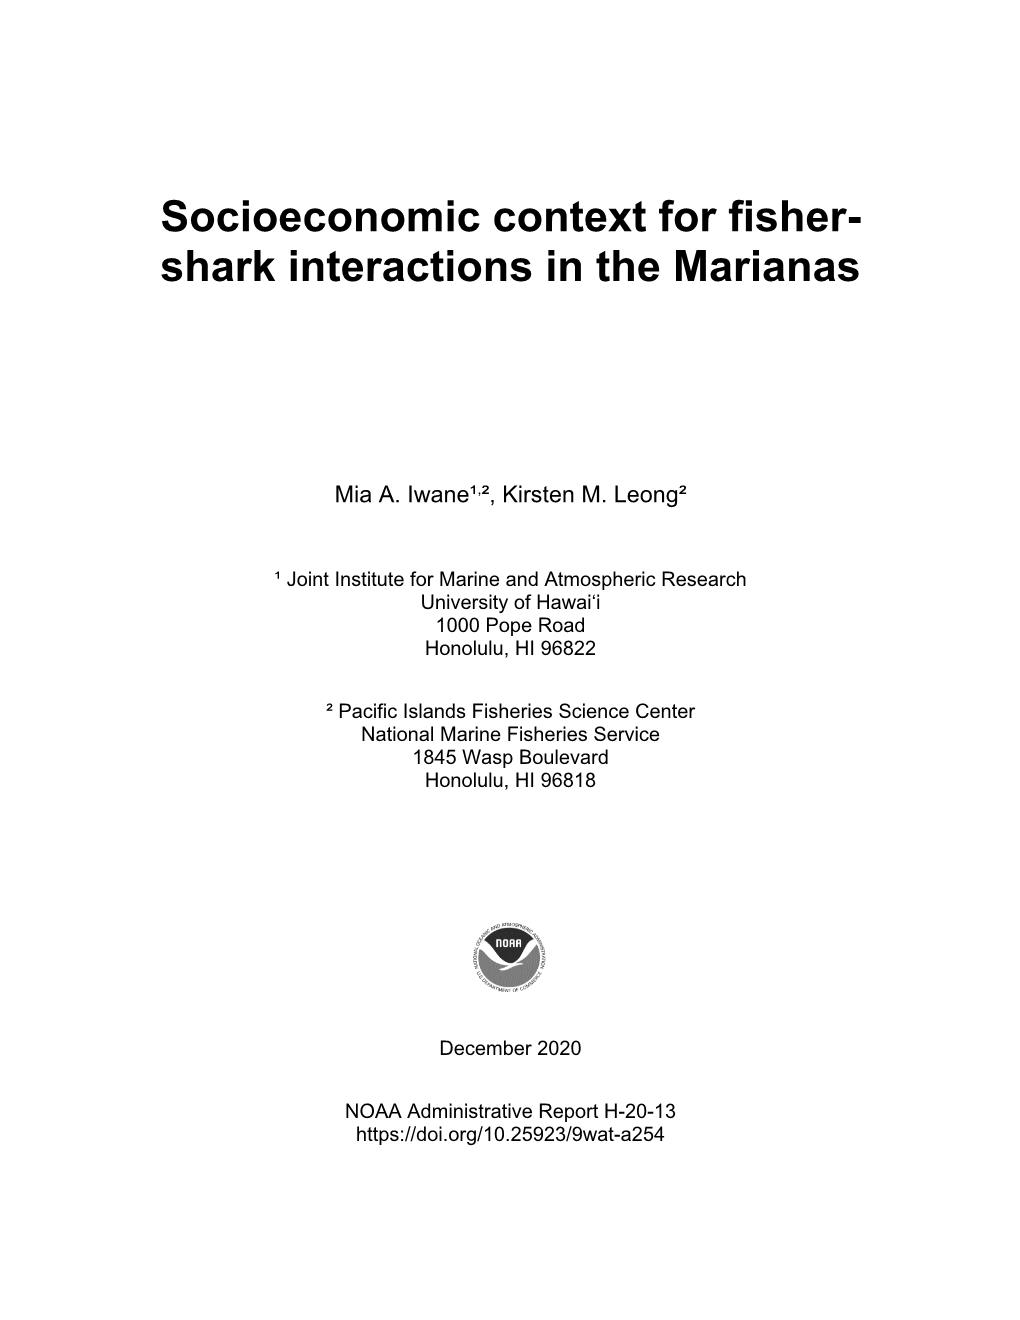 Socioeconomic Context for Fisher-Shark Interactions in the Marianas